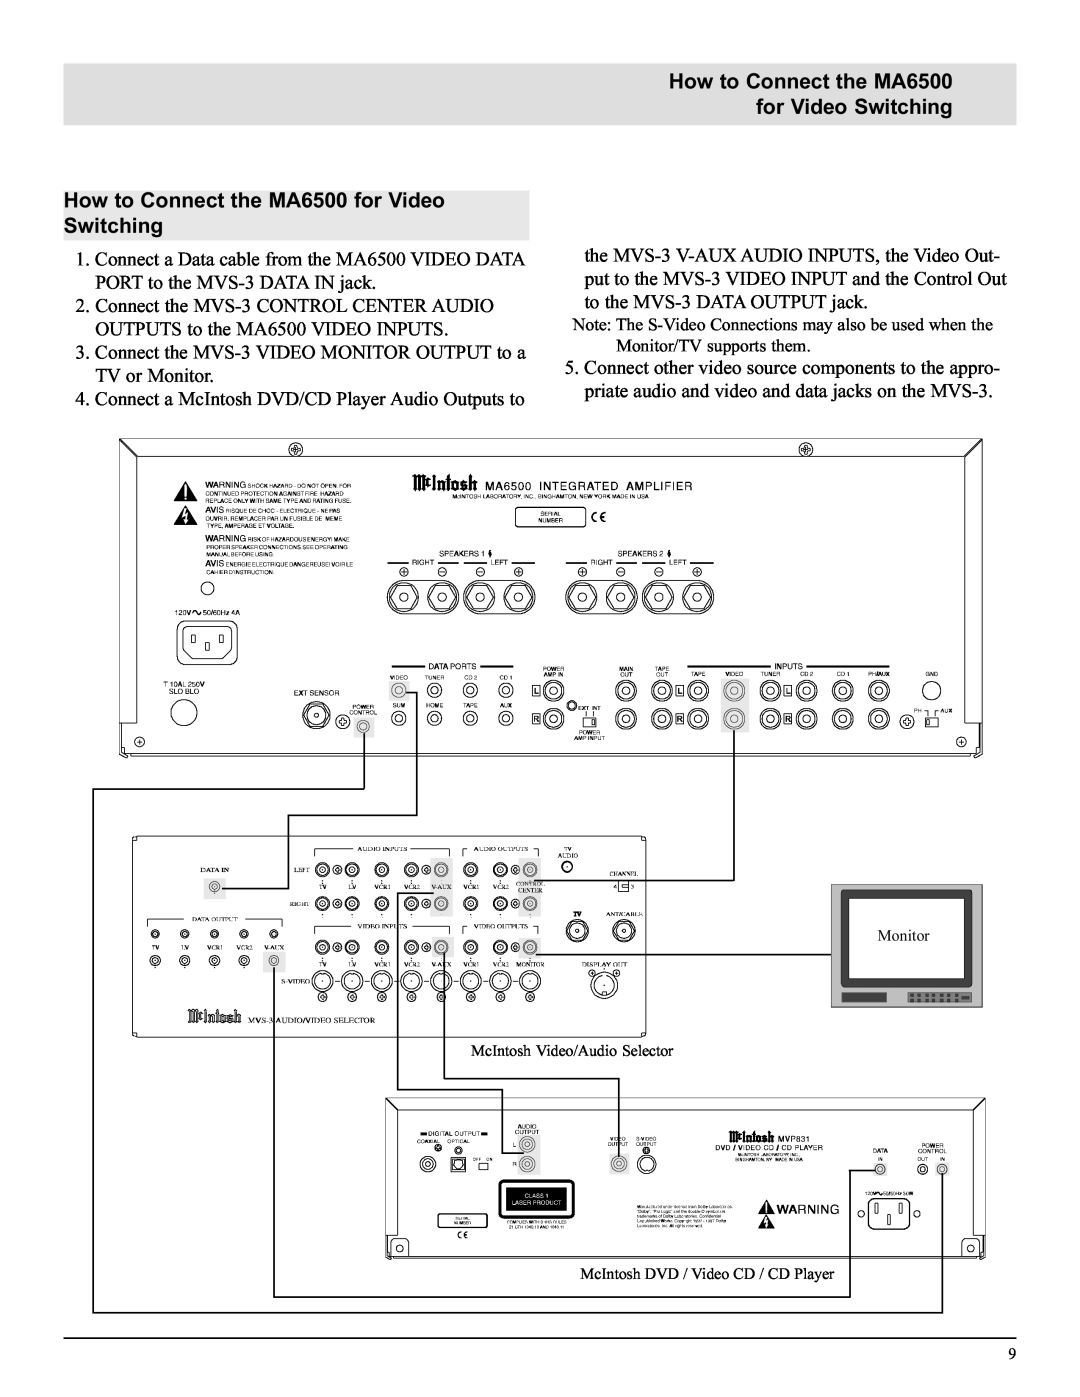 McIntosh manual How to Connect the MA6500 for Video Switching, McIntosh Video/Audio Selector 